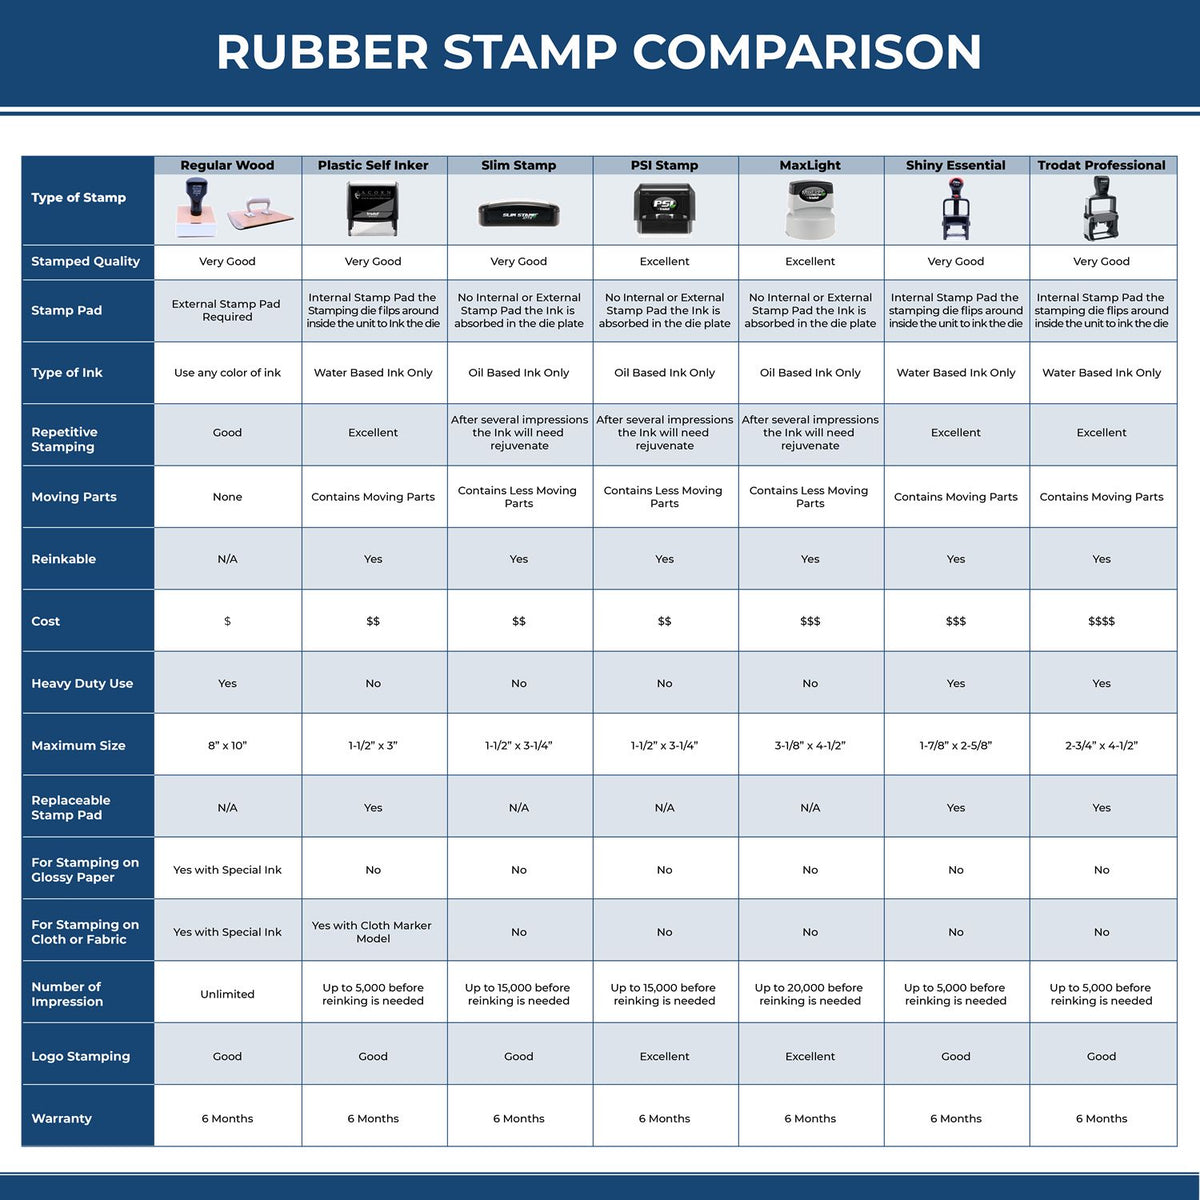 Large Self-Inking Faxed with Round Date Box Stamp 4845S Rubber Stamp Comparison